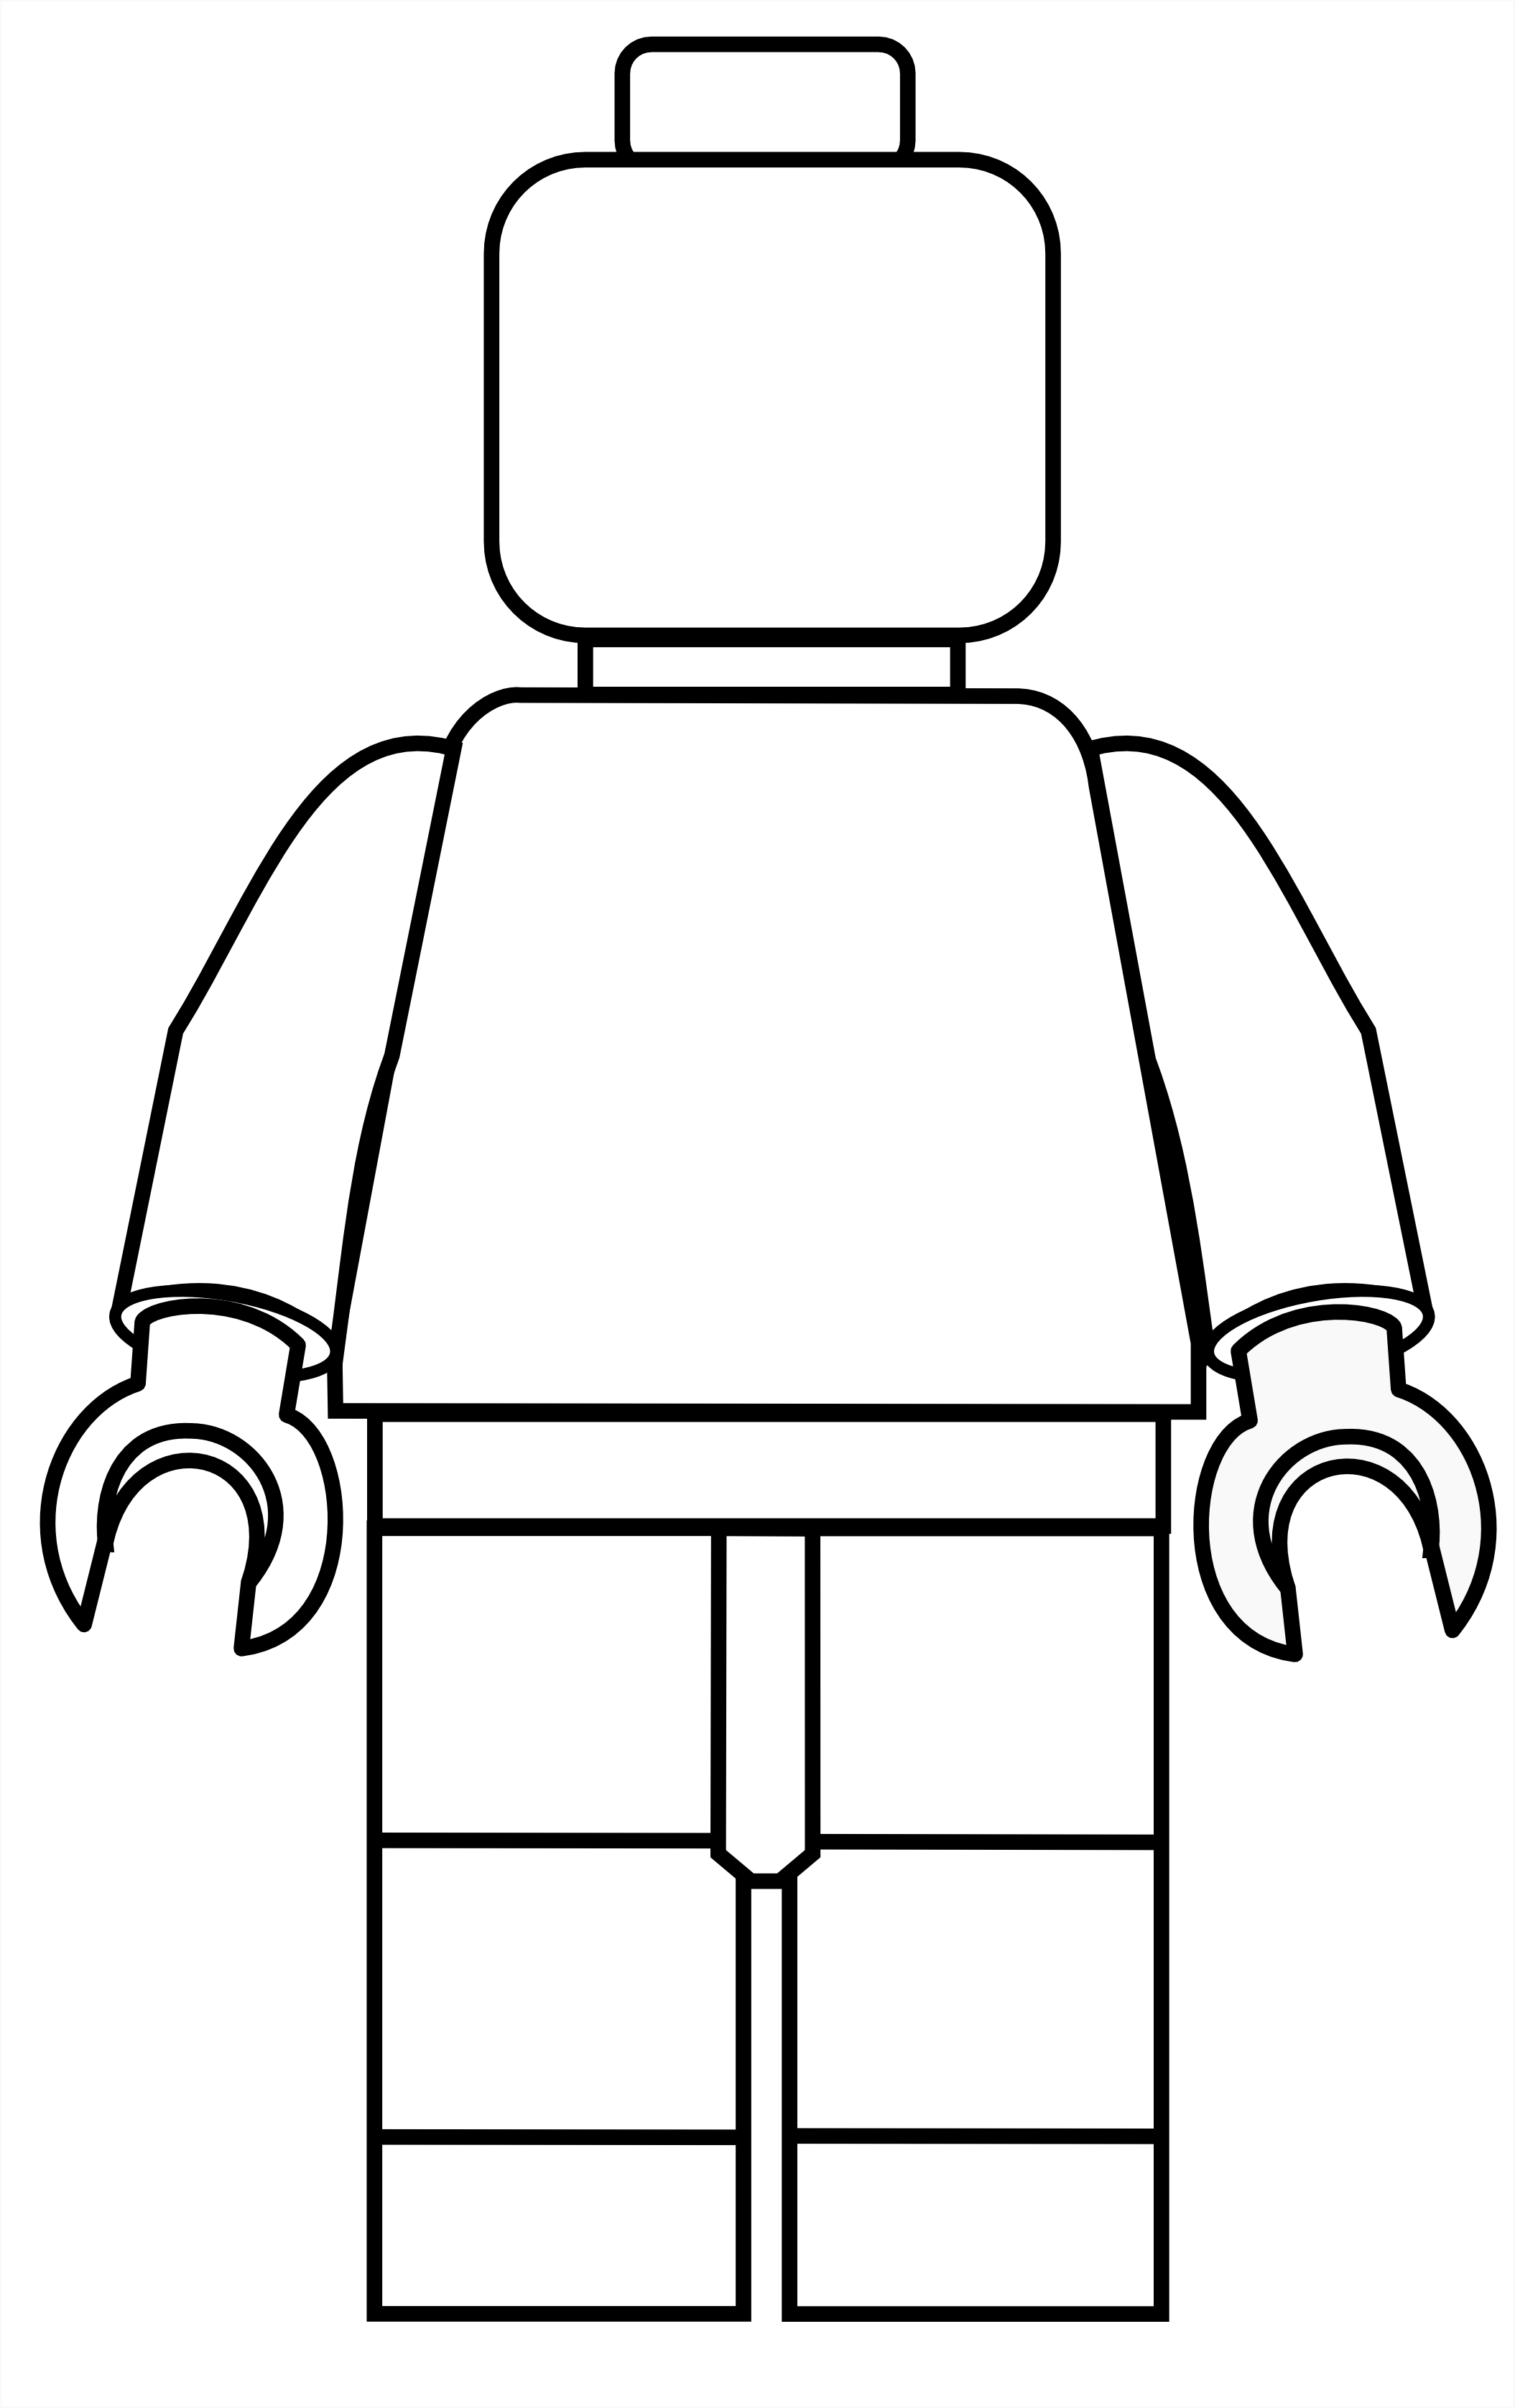 Person Outline Printable - Cliparts.co